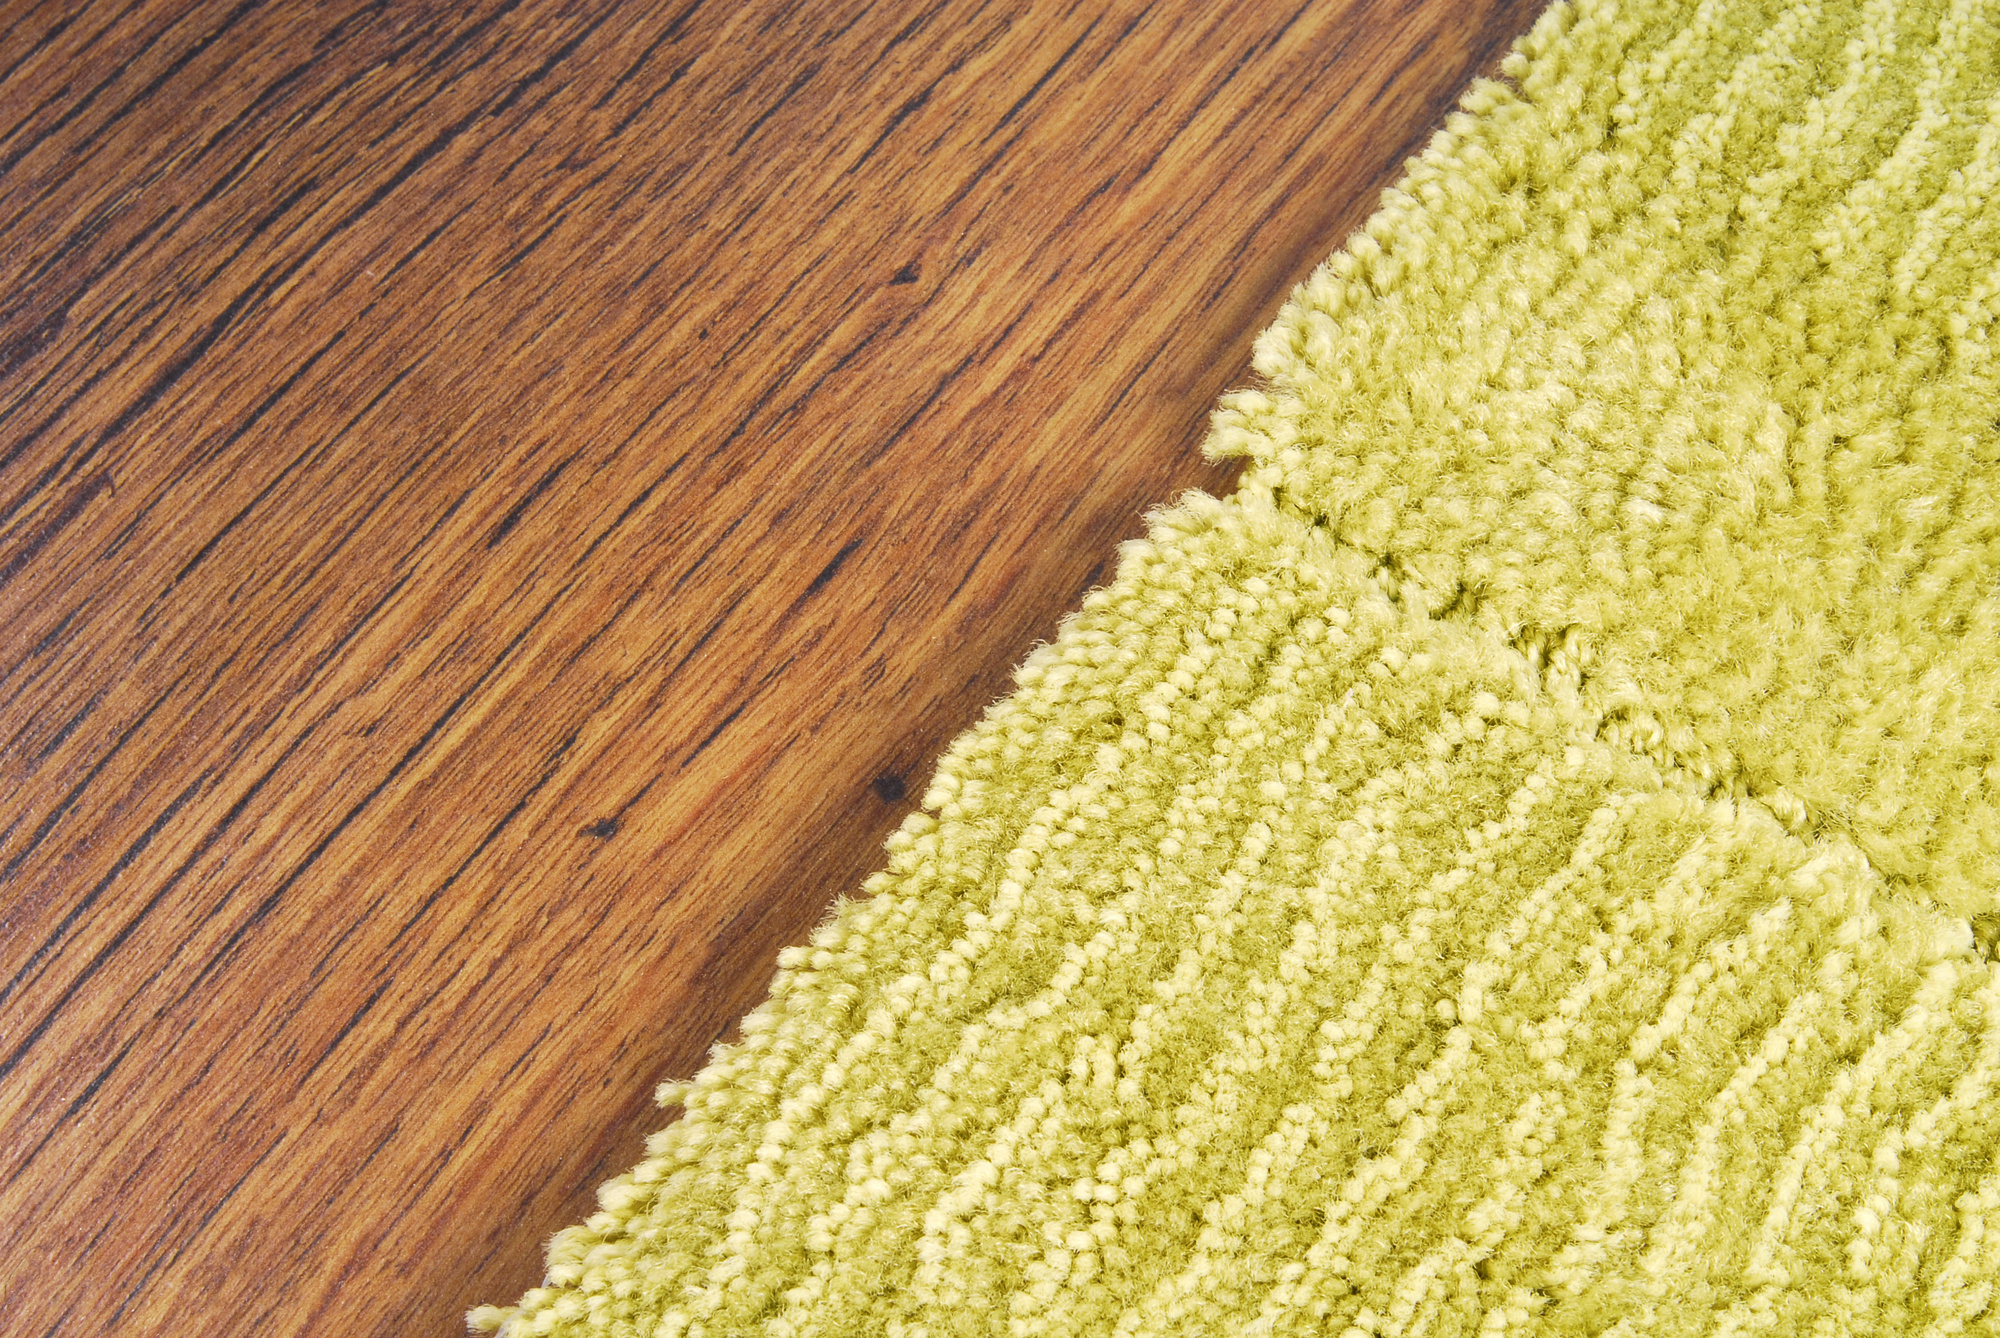 When it comes to giving the floors in your home a major upgrade, click here to find out how to choose between carpet vs hardwood.